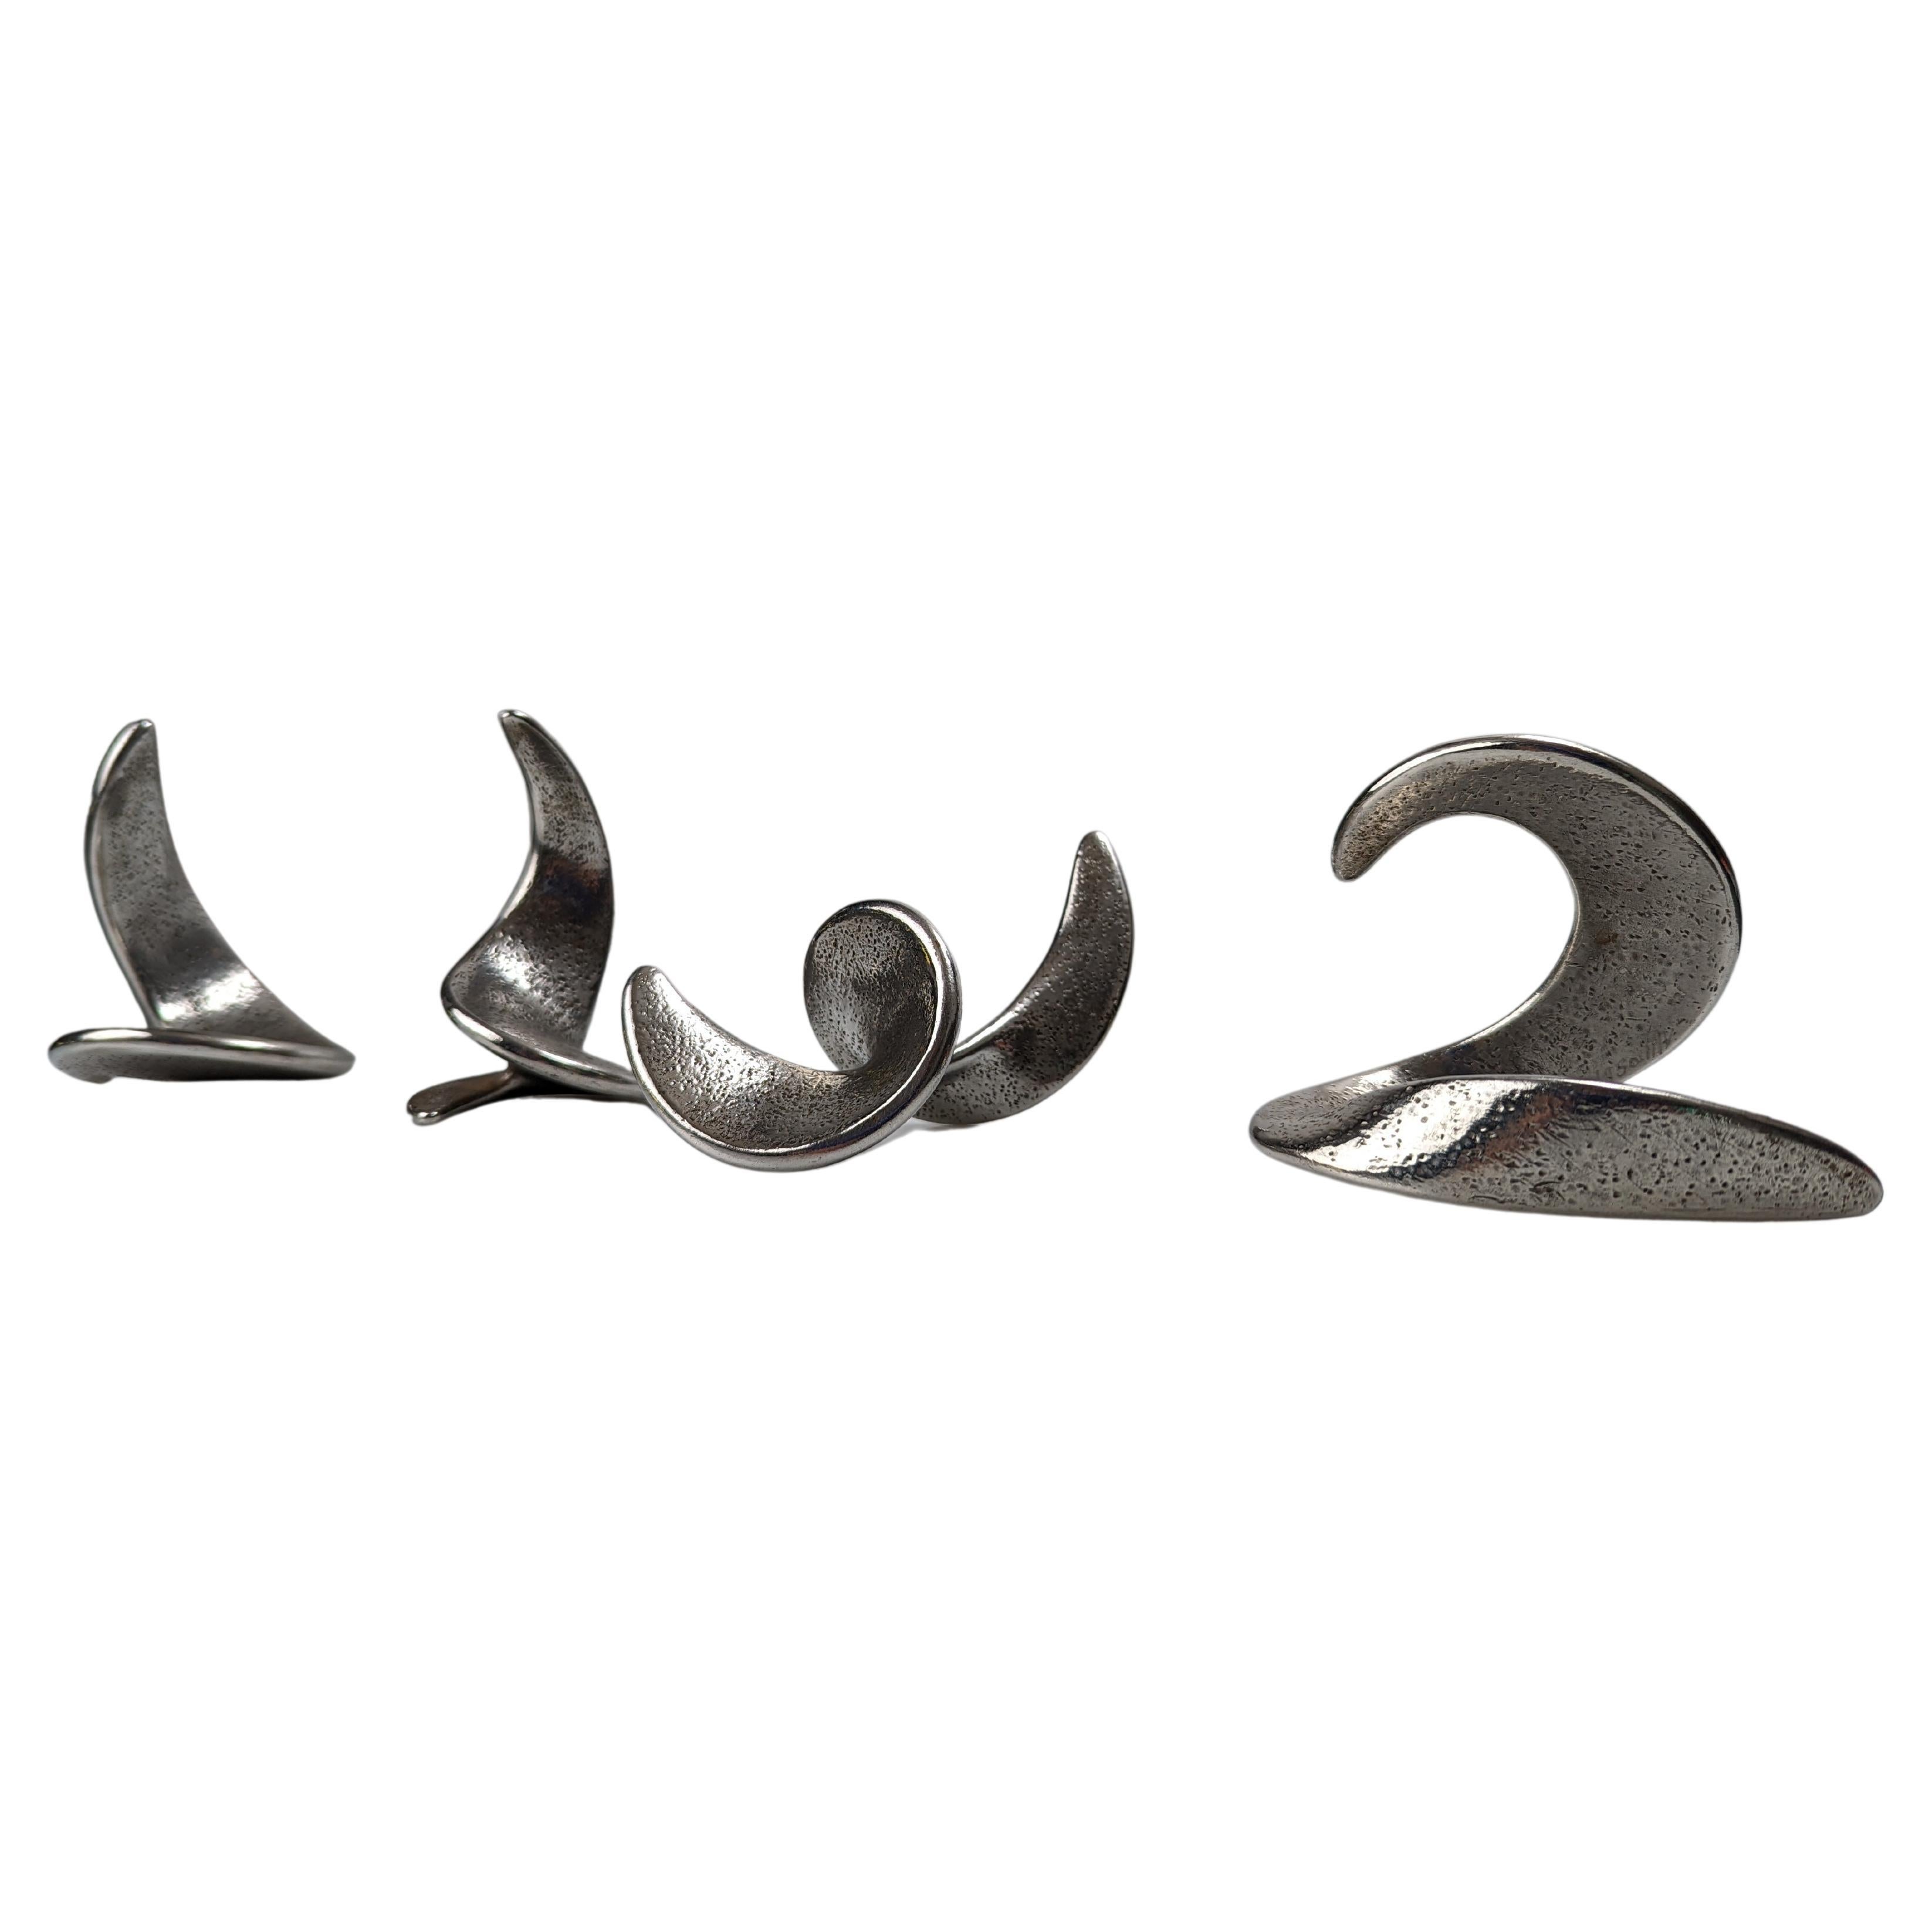 Very interesting set of sculptures with curved spiral shapes signed by the artist, numbered and dated. Each sculpture was made in a different year from 1987 to 1990, with only 150 units worldwide and as we can see in the numbering they make up a